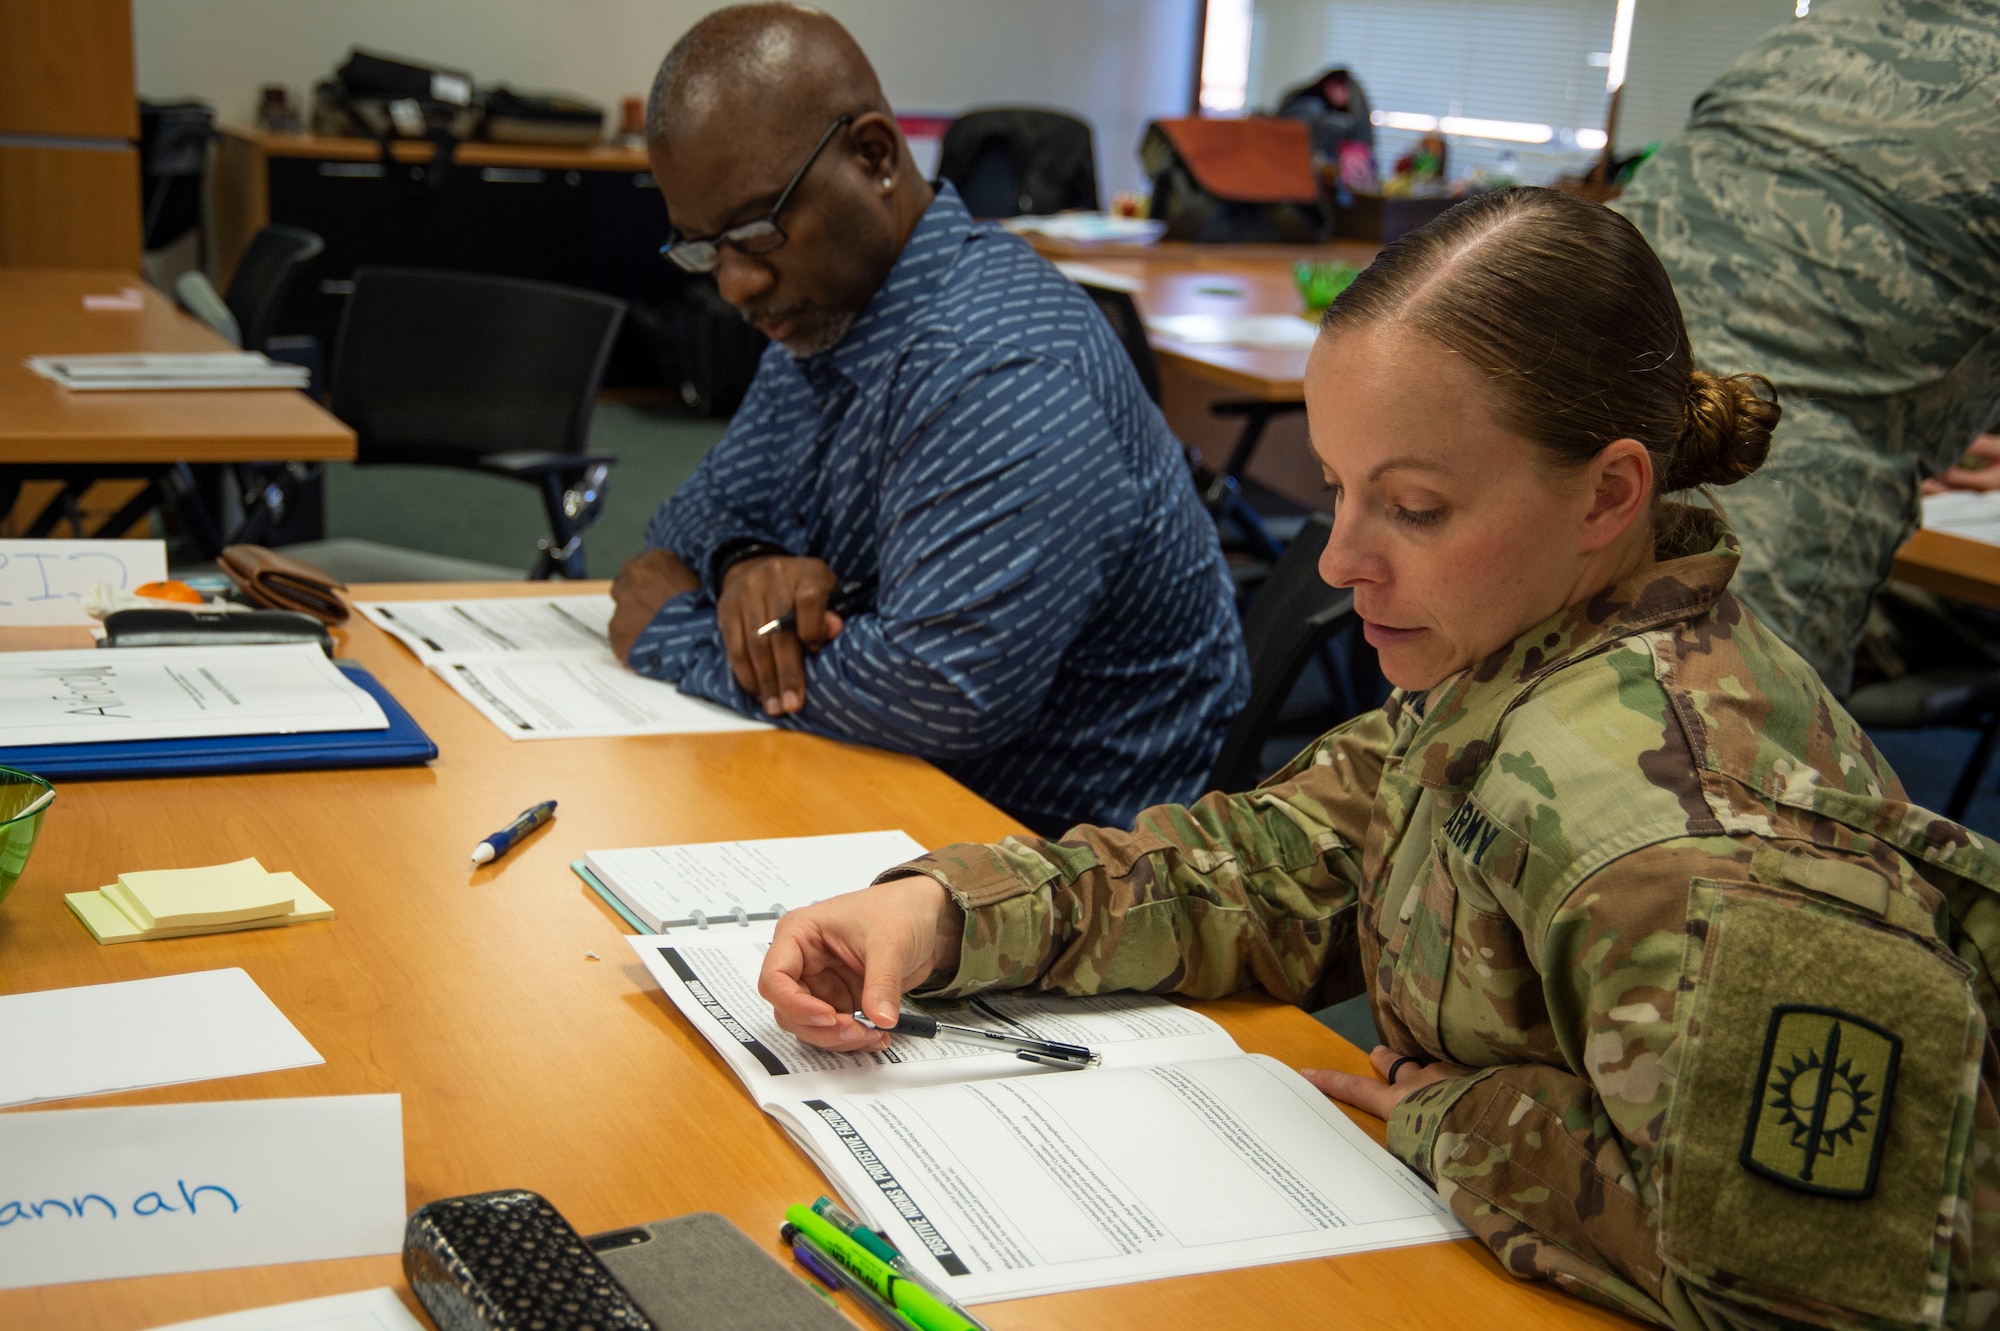 Cisco Johnson, 647th Force Support Squadron recovery care coordinator, and U.S. Amy Sgt. 1st Class Hannah Nunley, 728th Military Police Battalion sexual assault and response coordinator, work together on a prevention activity during the Green Dot Shift Happens workshop on Joint Base Pearl Harbor-Hickam, Hawaii, Mar. 13, 2019. Green Dot underwent a foundational shift from a focus on teaching members how to respond to a violent situation, to emphasizing cultural changes to prevent violent situations. (U.S. Air Force photo by Tech. Sgt. Heather Redman)